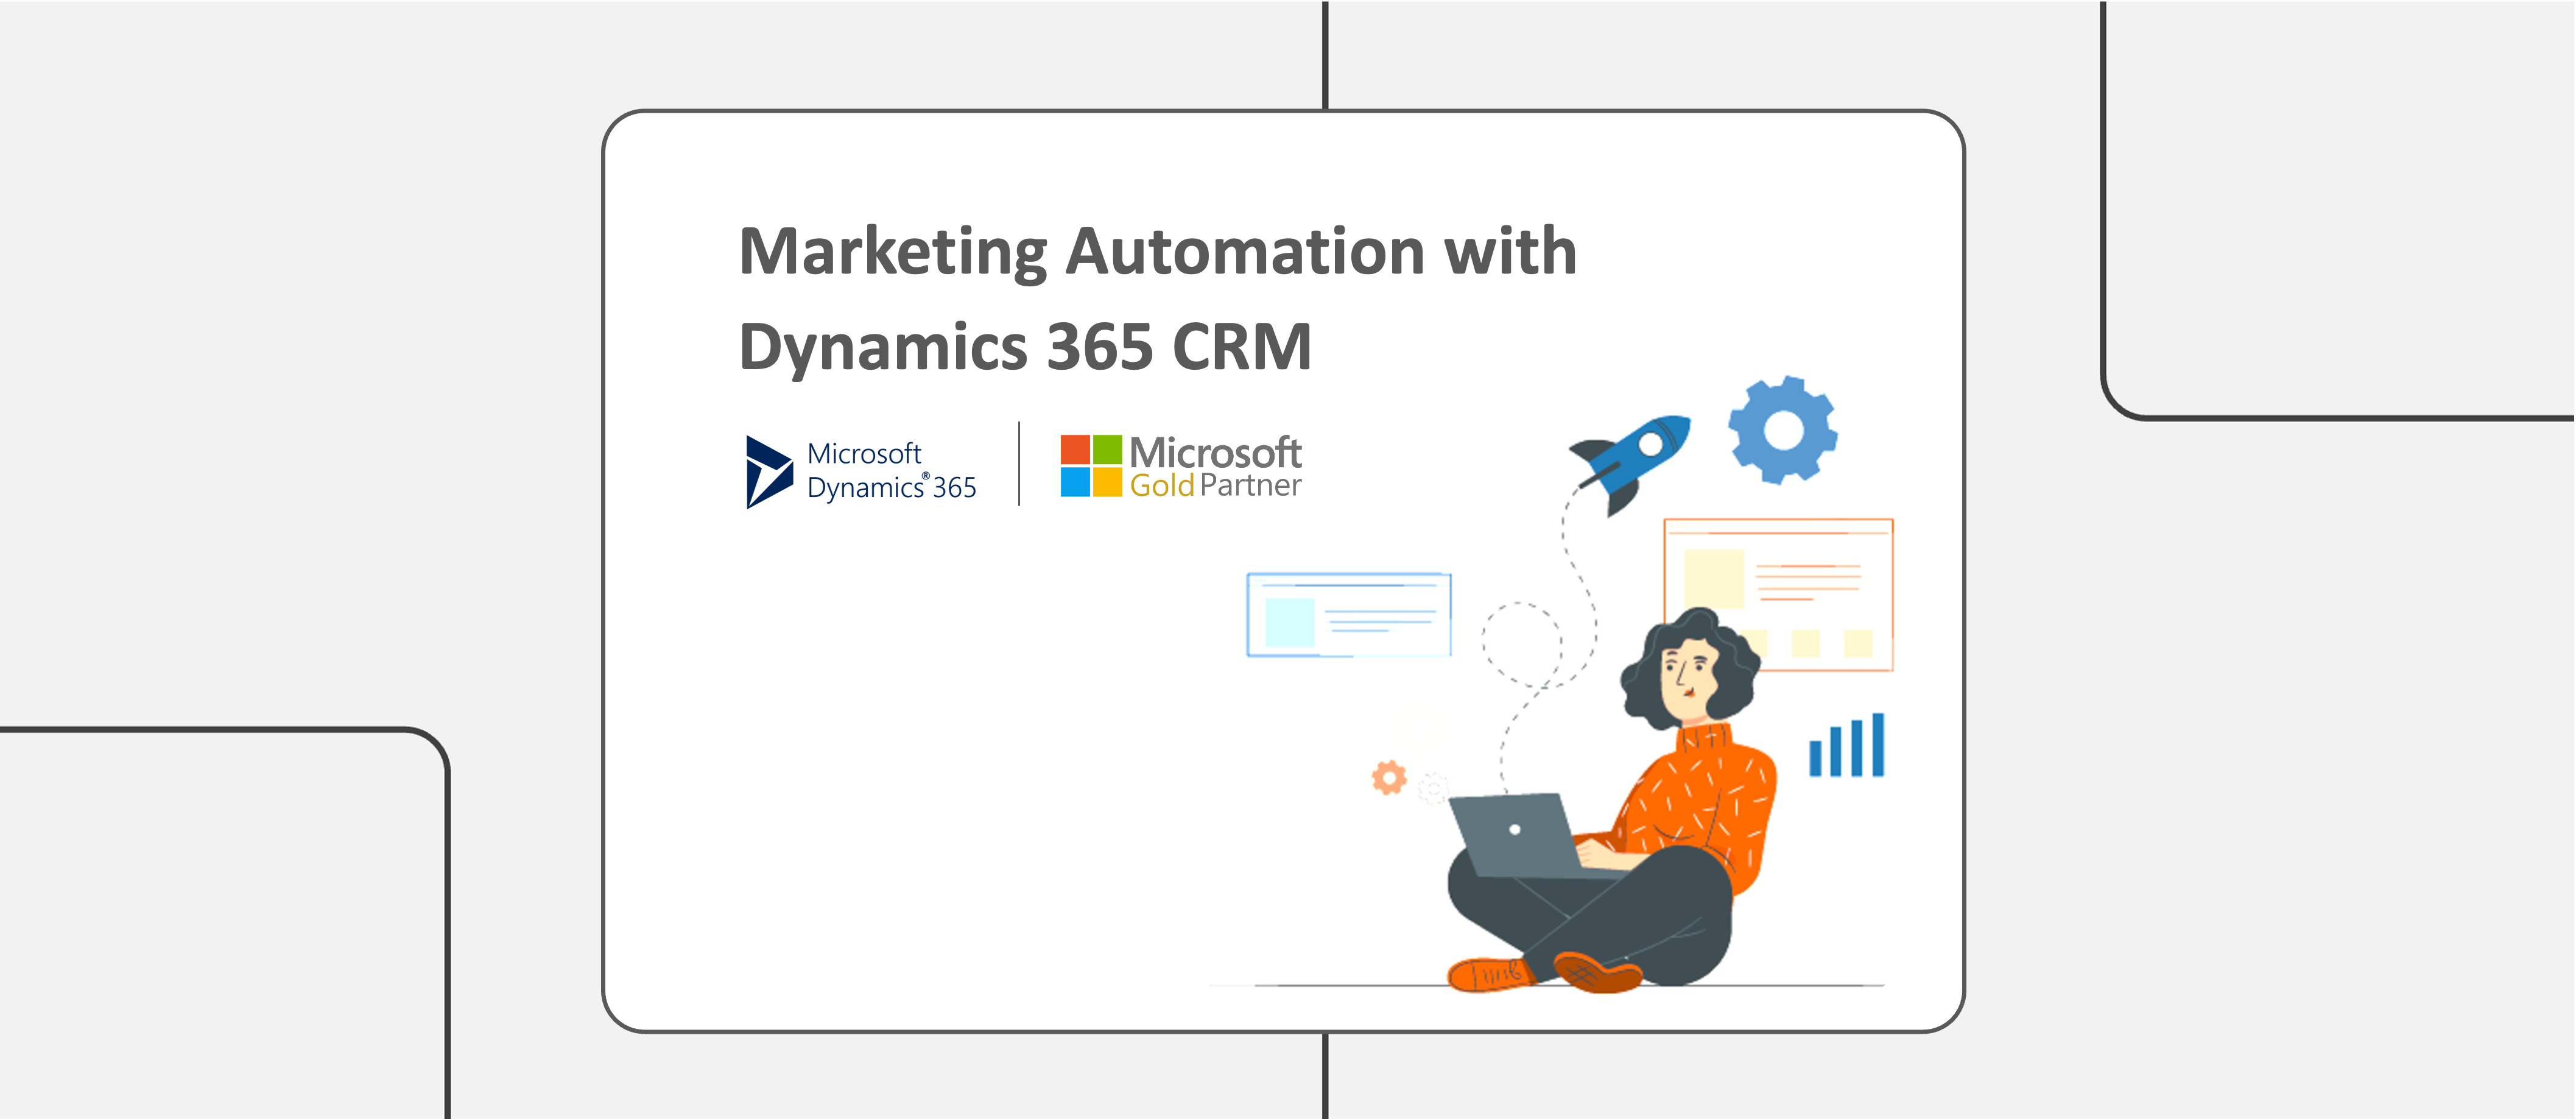 Benefits of Marketing Automation with Dynamics 365 CRM